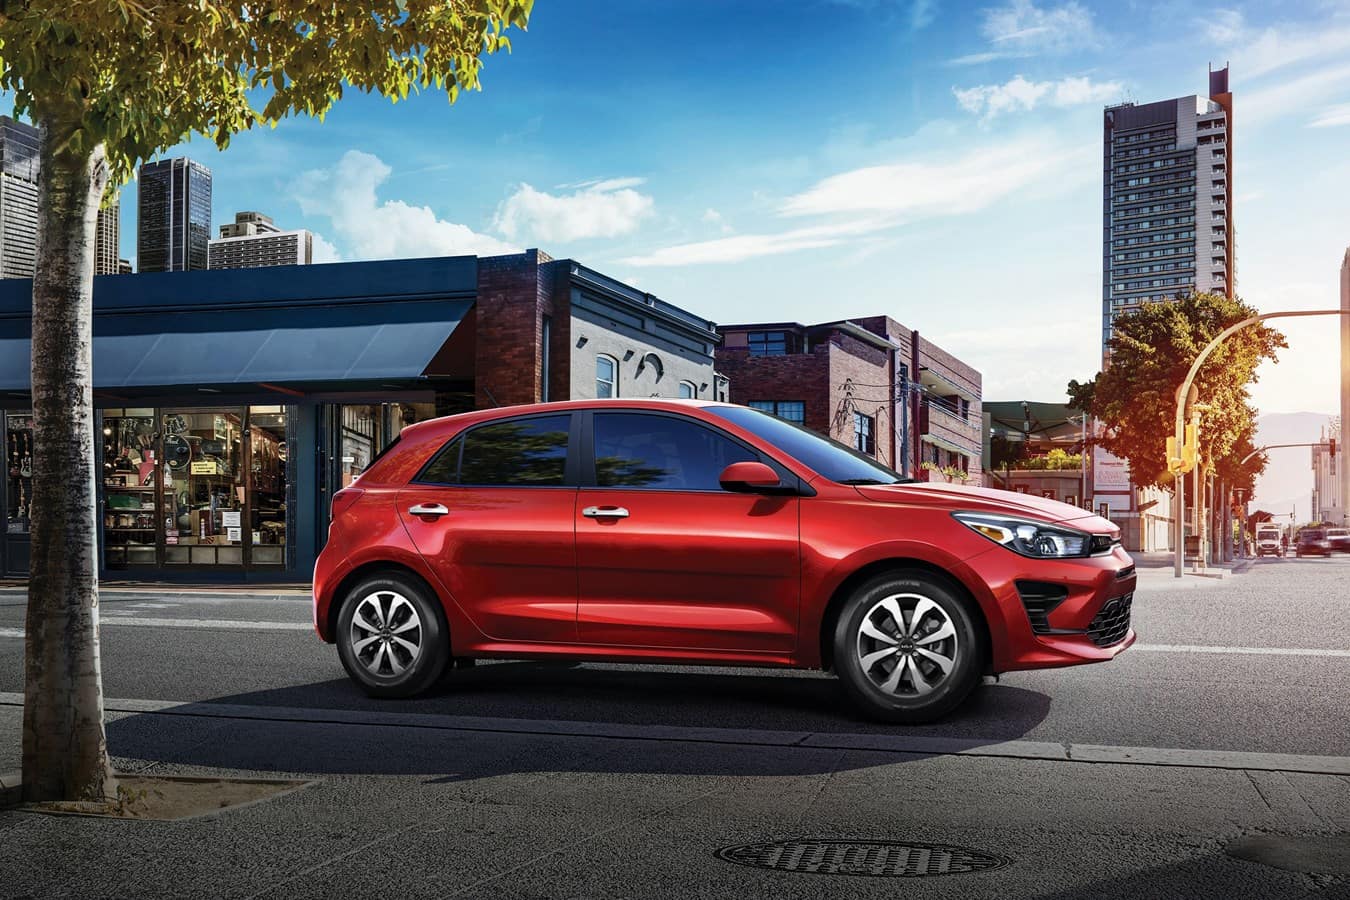 New Kia Rio - Affordable Compact Car - Industry Leading Warranty